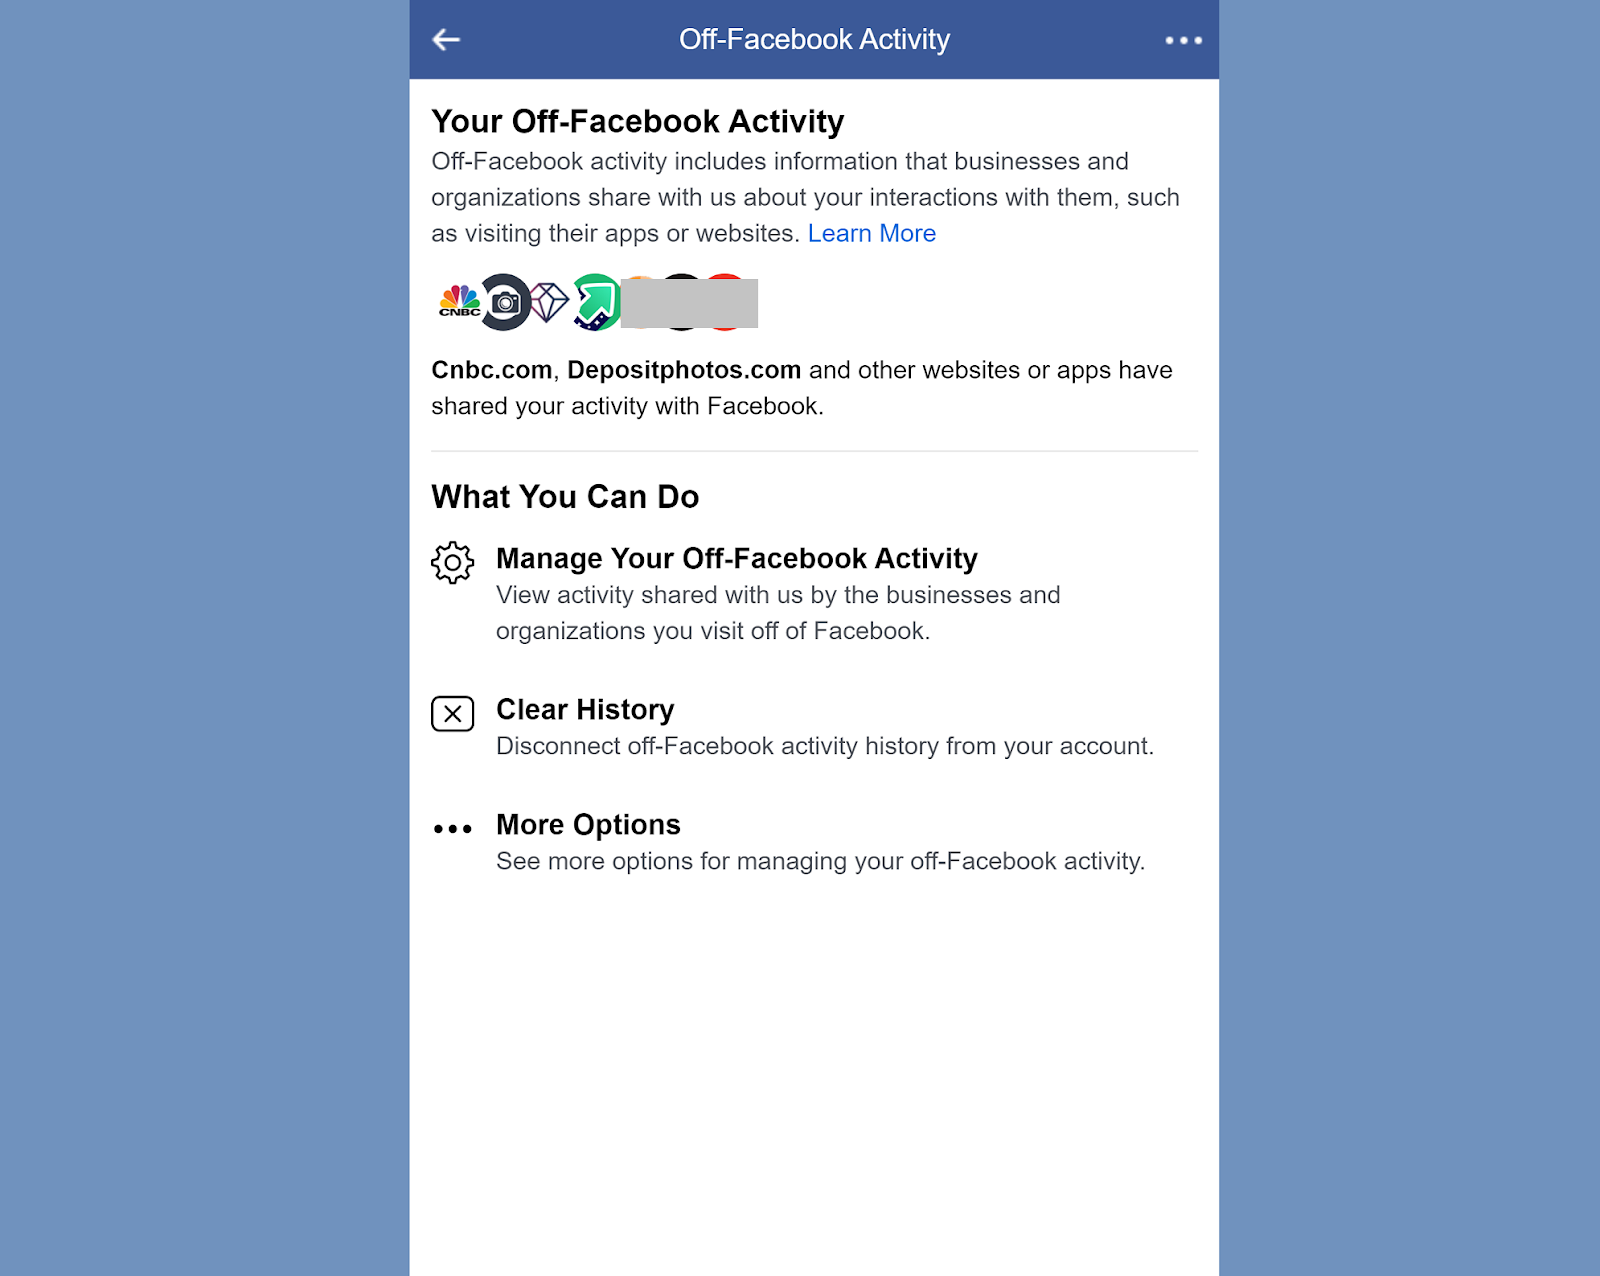 Facebook now has a new option of ‘clear history’ available for its